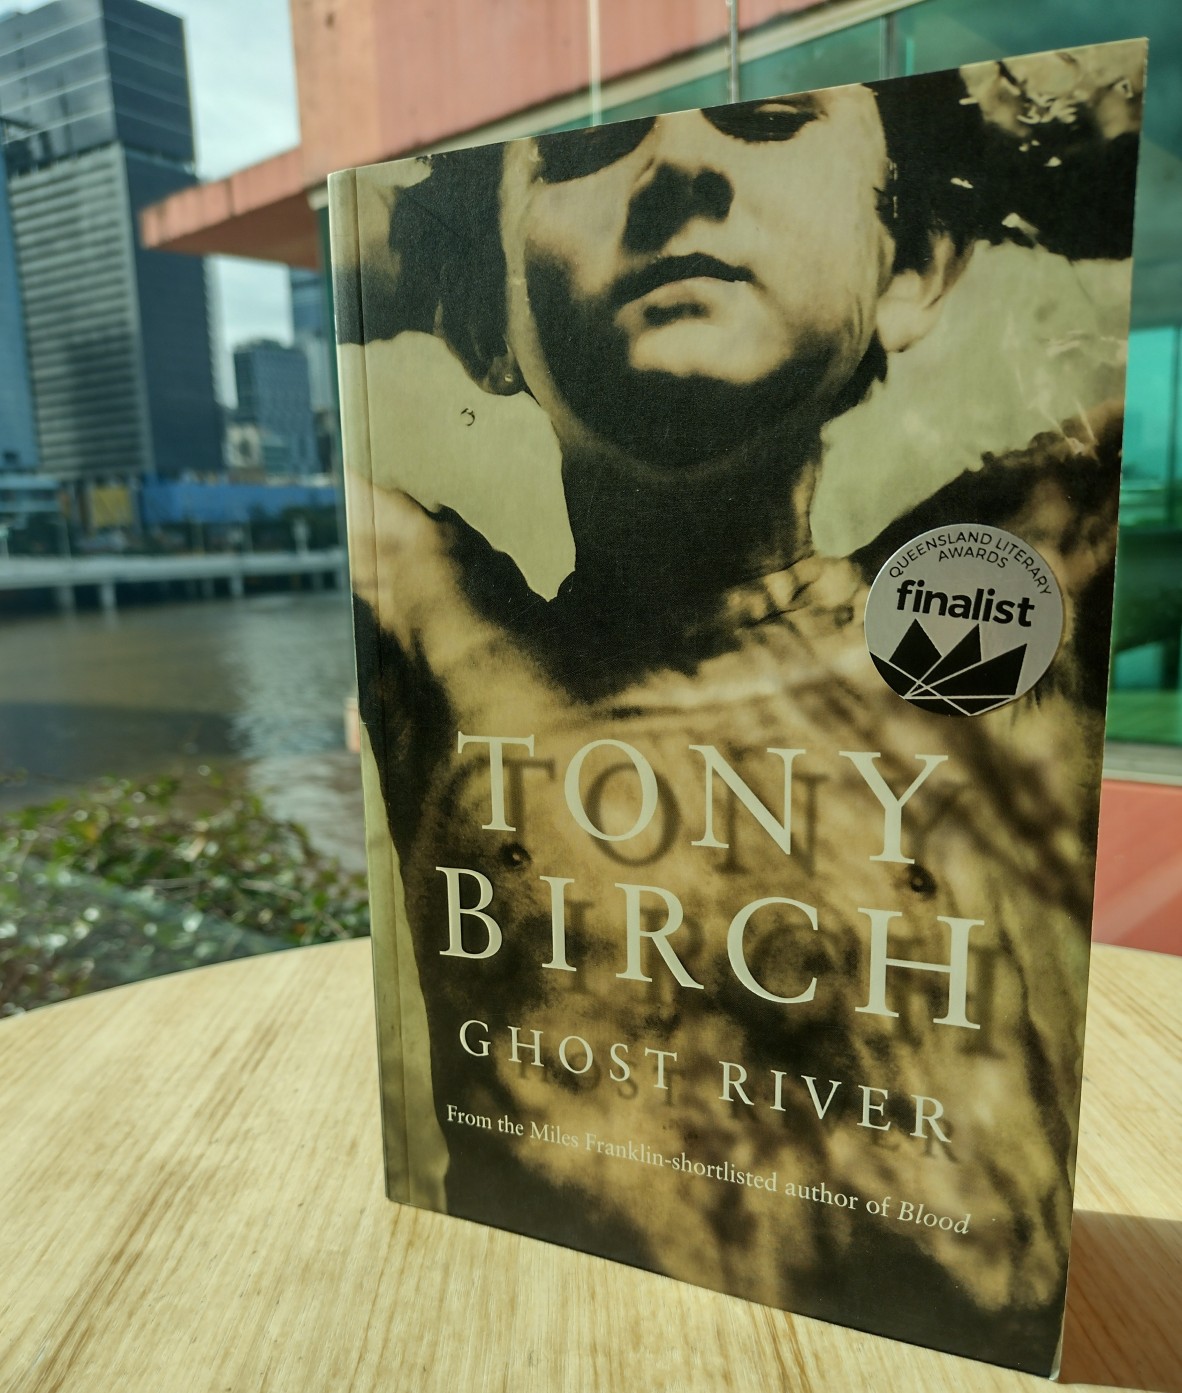 A book sitting on a table in a light-filled space with a cityscape and glimpse of a river in the background The text on the cover reads Tony Birch Ghost River From the Miles Franklin-shortlisted author of Blood